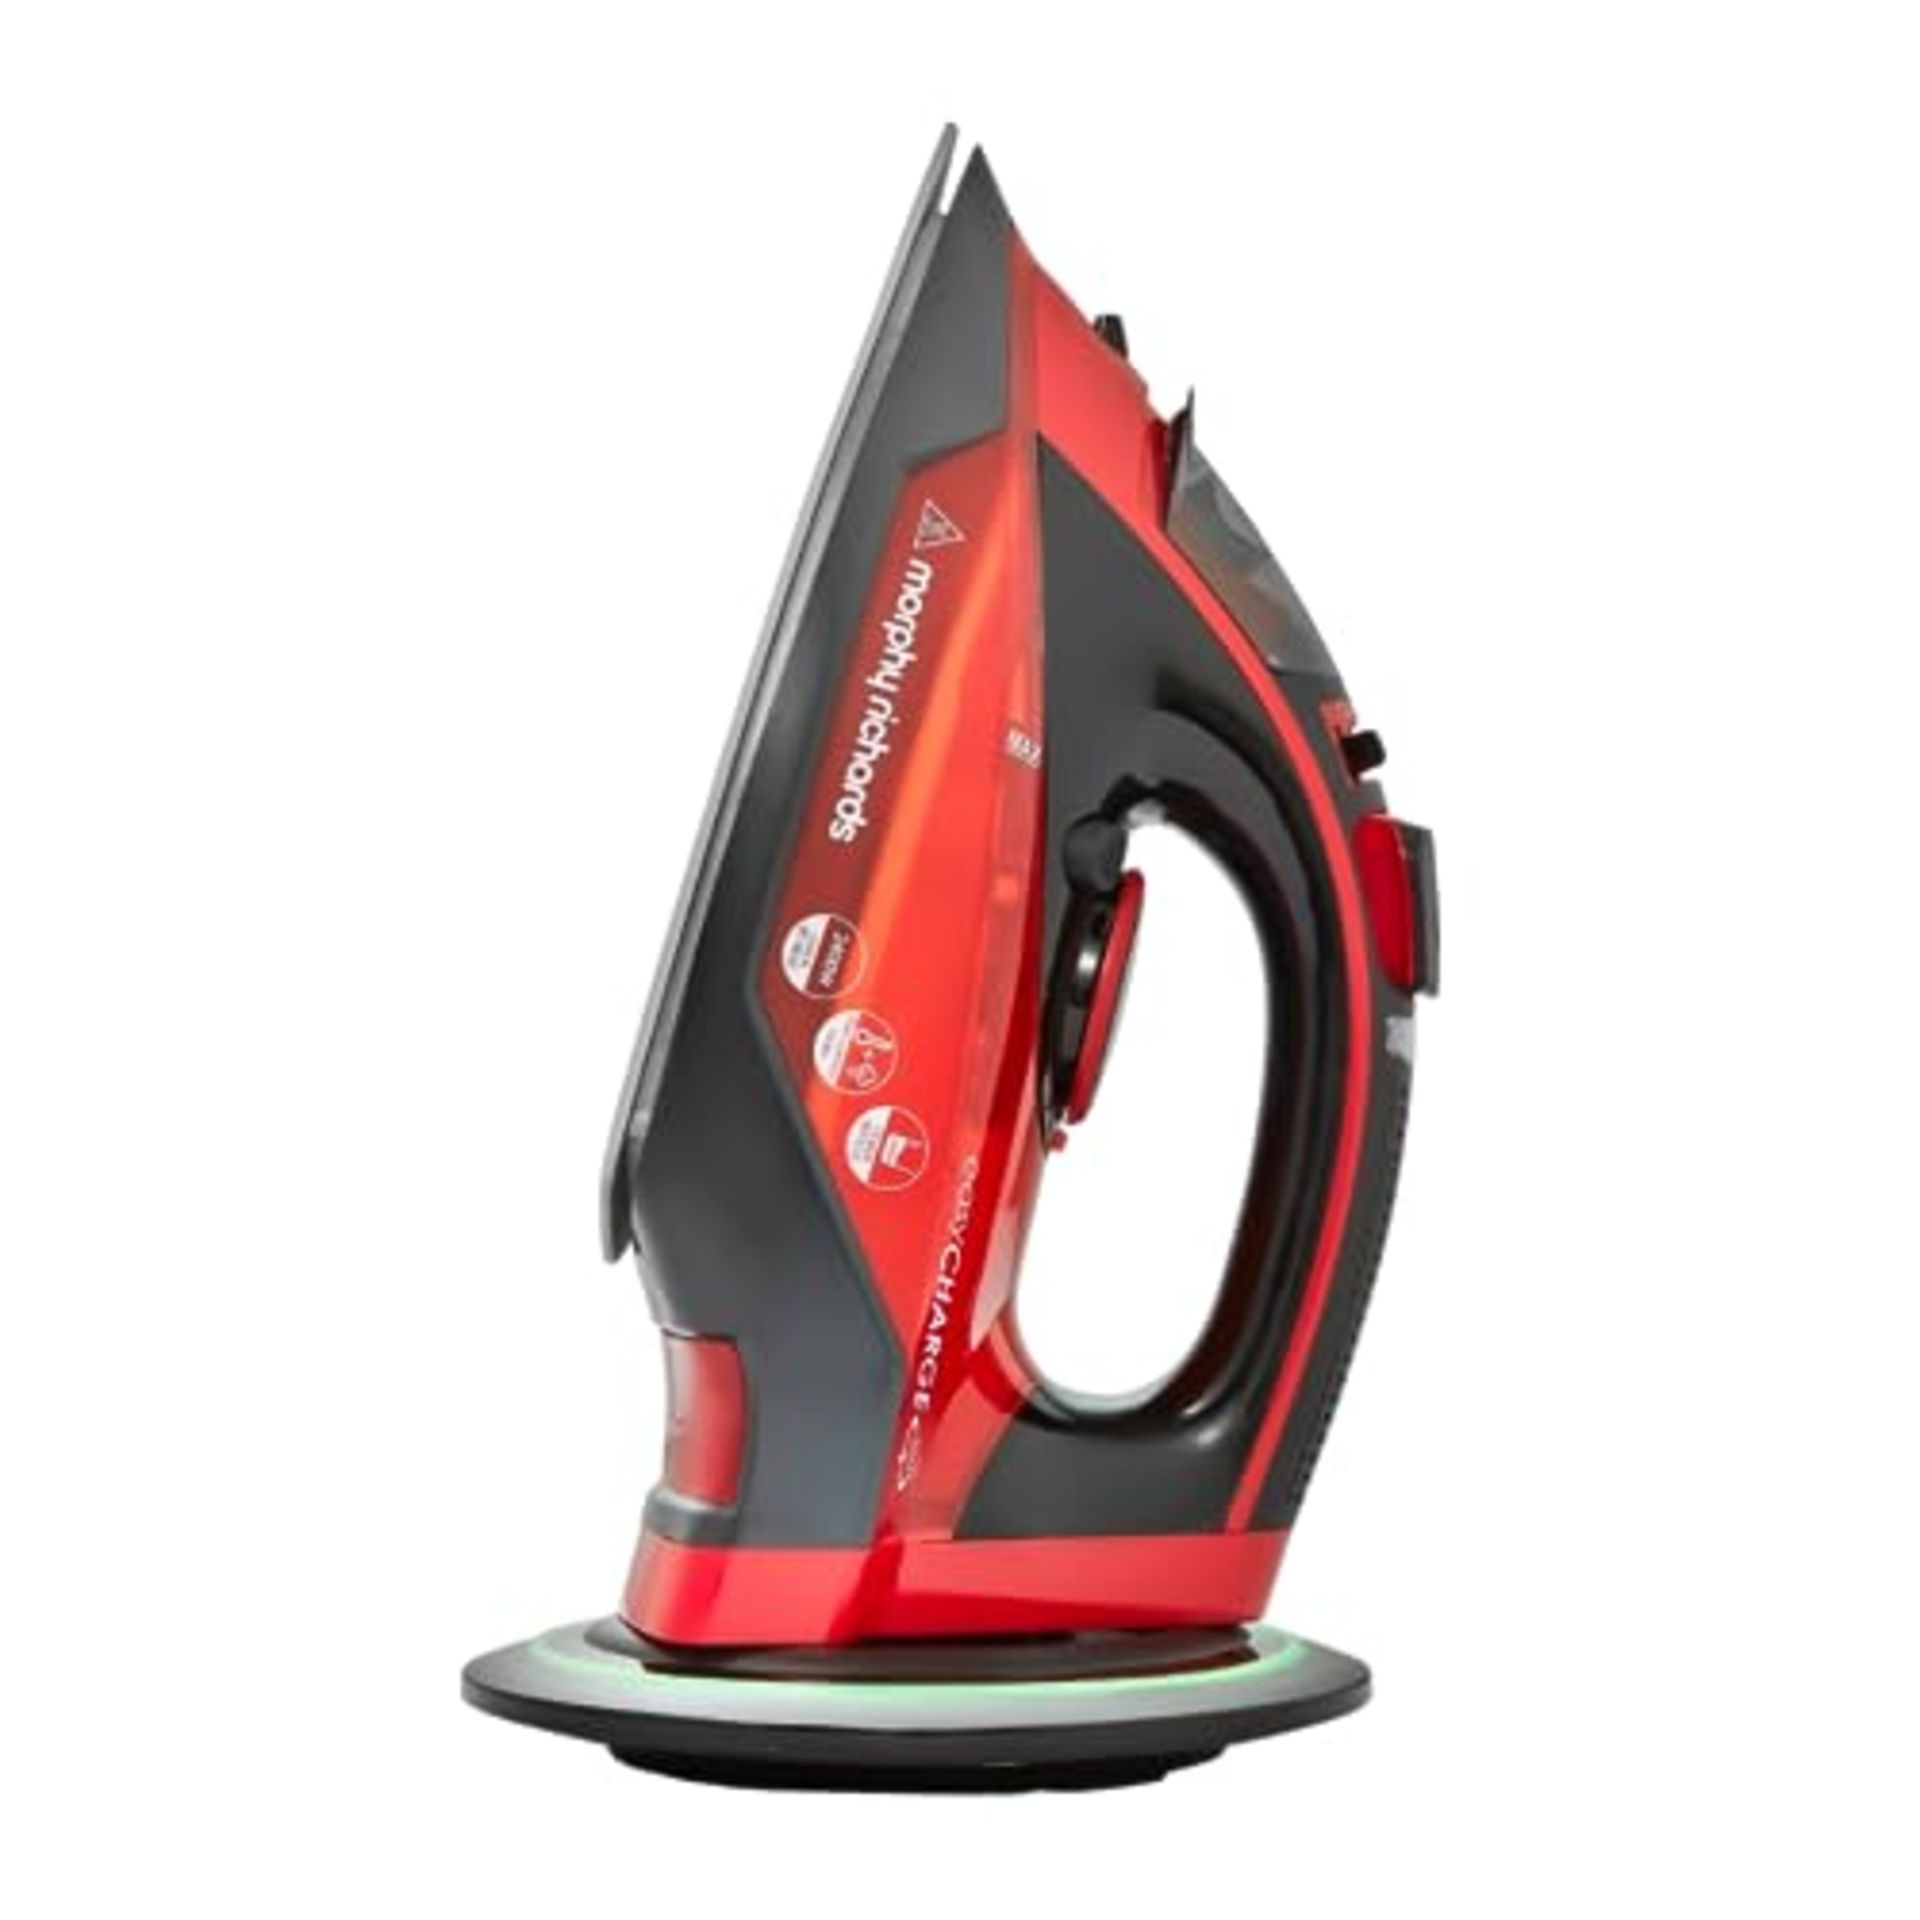 Morphy Richards EasyCHARGE Cordless Iron, Precision Tip, Ceramic Soleplate, Anti Scale